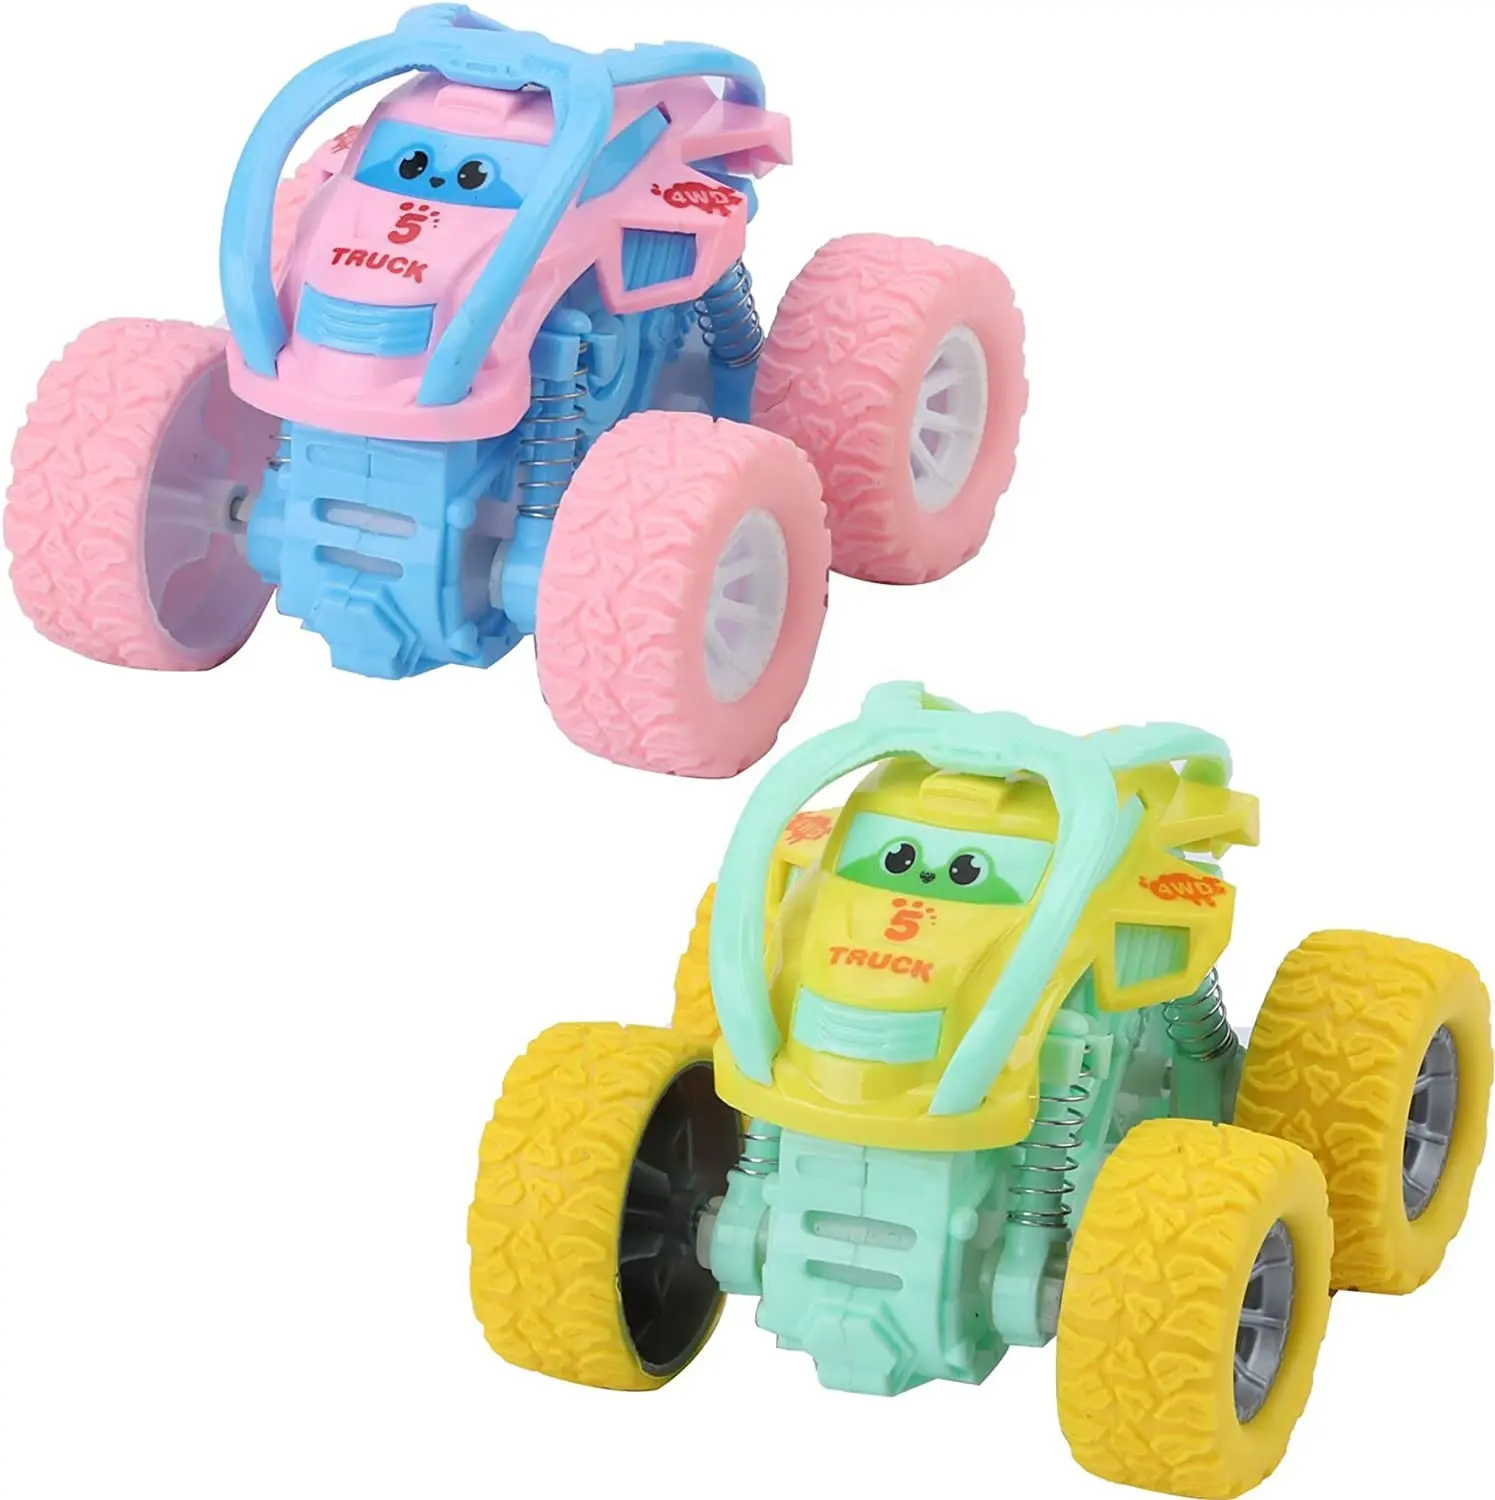 Toy Cars Monster Trucks 2 Pack Car Toys Friction Powered Push And Go Cute Kids Car Friction Toy Vehicle For Boys Girls Toddler